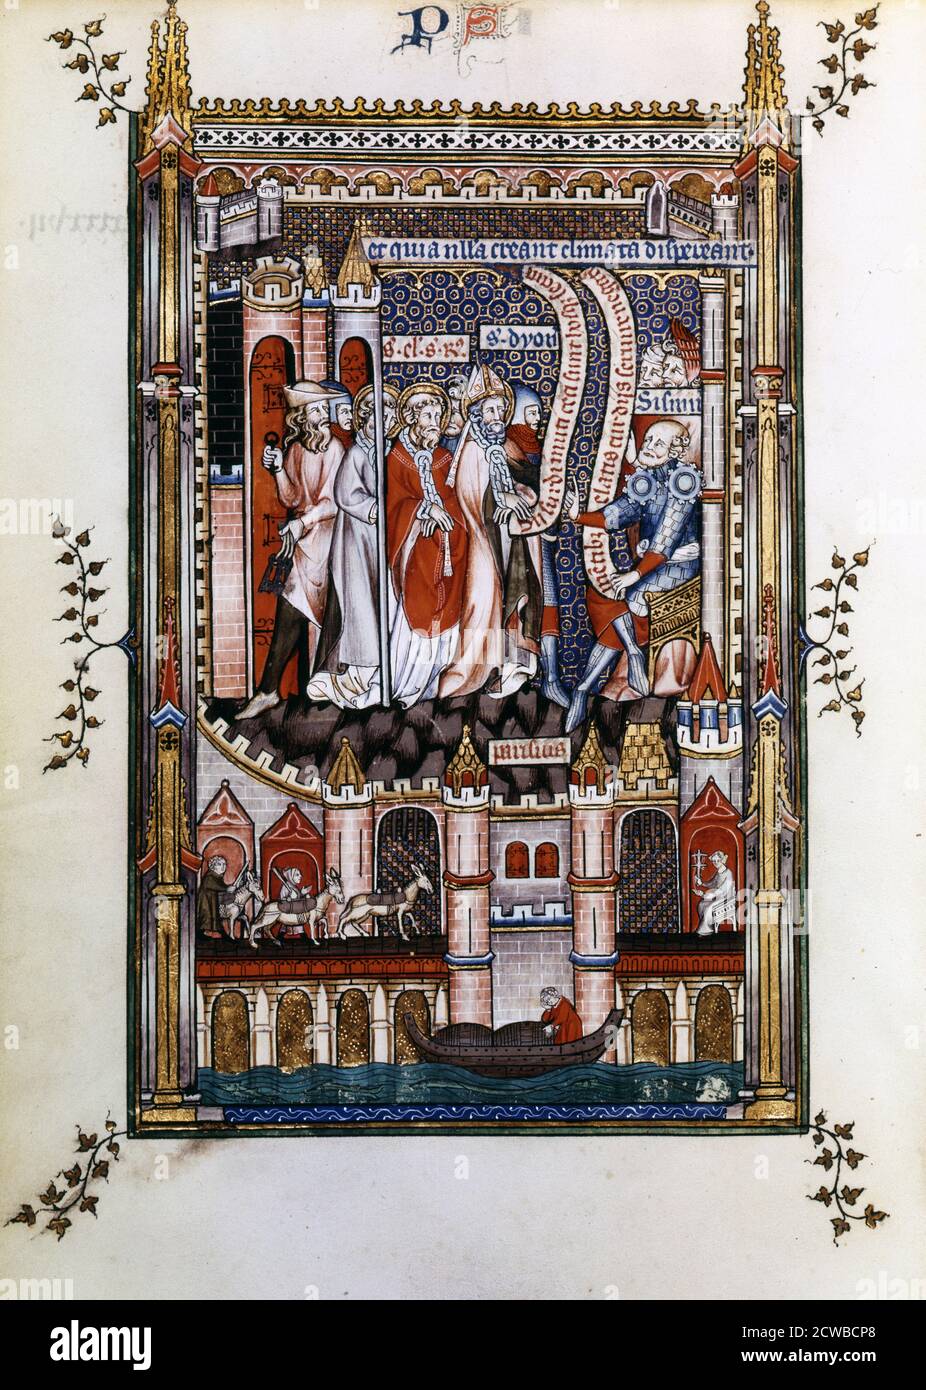 St Denis in chains before Sisinnius, 1317. St Denis, St Eleutherius and St Rusticus stand before Sisinnius in chains. Manuscript illustration from a work on the life of St Denis (died c258 AD), written by Yves, a monk at the Abbey of St Denis. The book depicts the torture and martyrdom of the saint by the Roman governor Fescenninus Sisinnius. The lower scene displays people on the bridge over the River Seine, showing a mule-driver with his animals, and a boat laden with barrels. From the collection of the Bibliotheque Nationale, Paris. The artist is unknown. Stock Photo